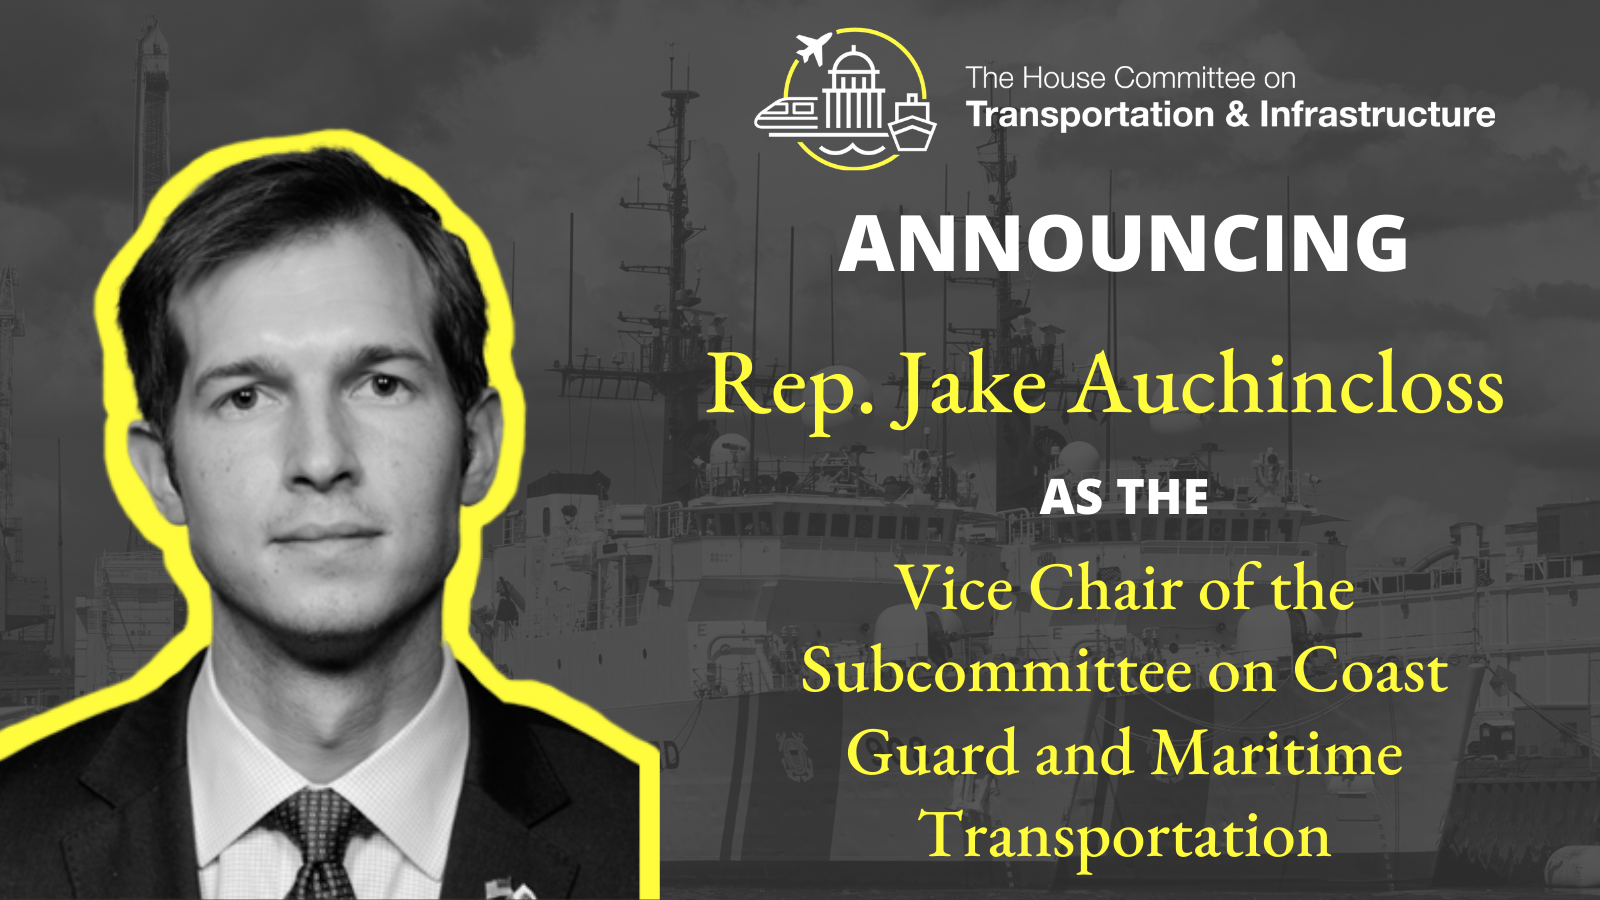 Vice Chair of Subcommittee on Coast Guard and Maritime Transportation 2021